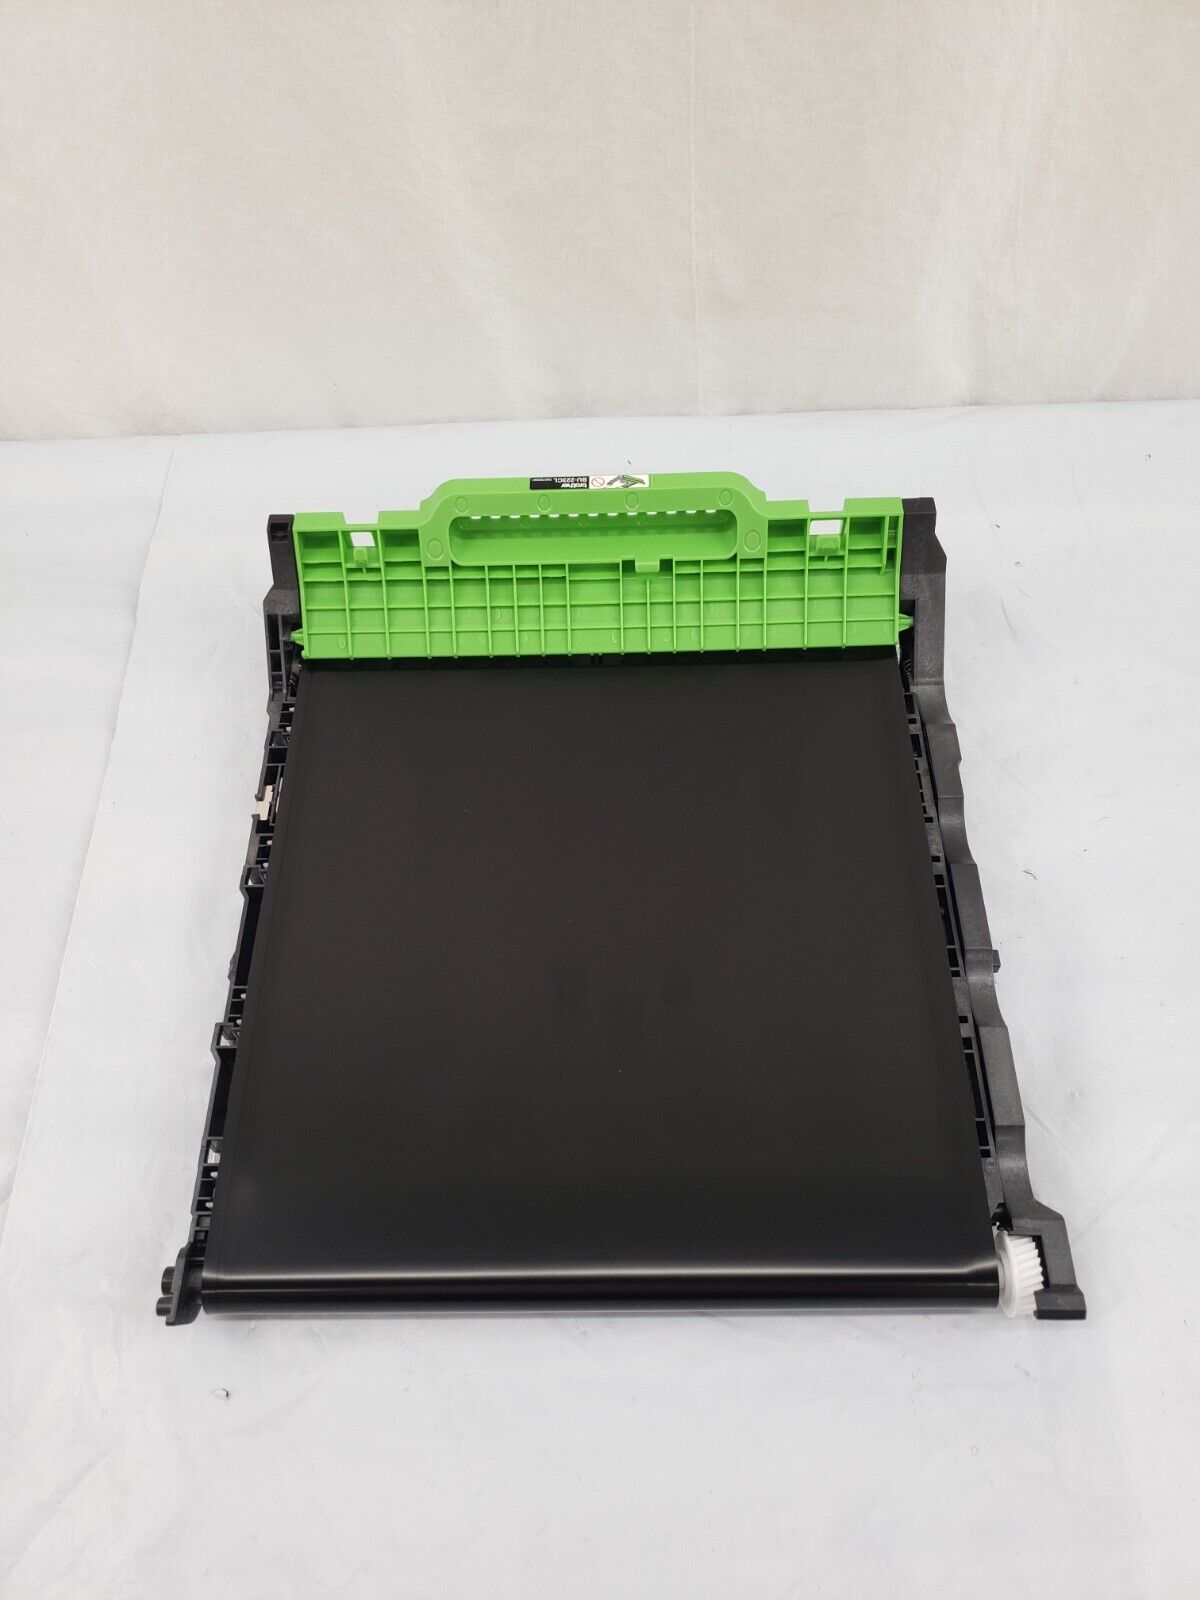 New OEM Replacement Transfer Belt Part for BROTHER Printer HL-L3290CDW & More